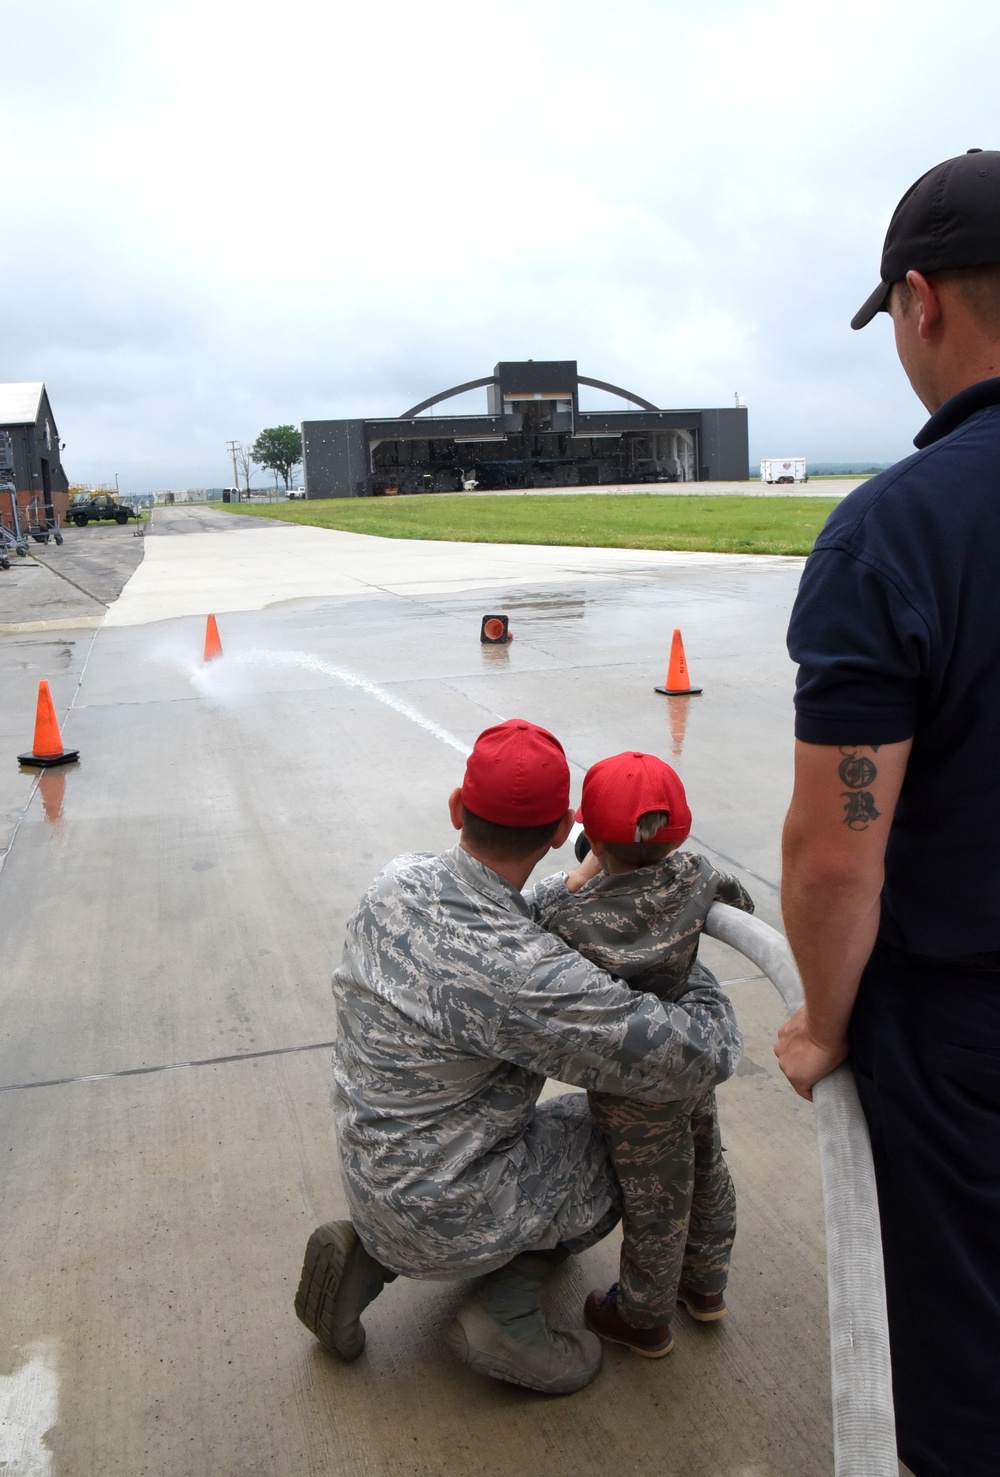 179th Airlift Wing Hosts Bring Your Child To Work Day